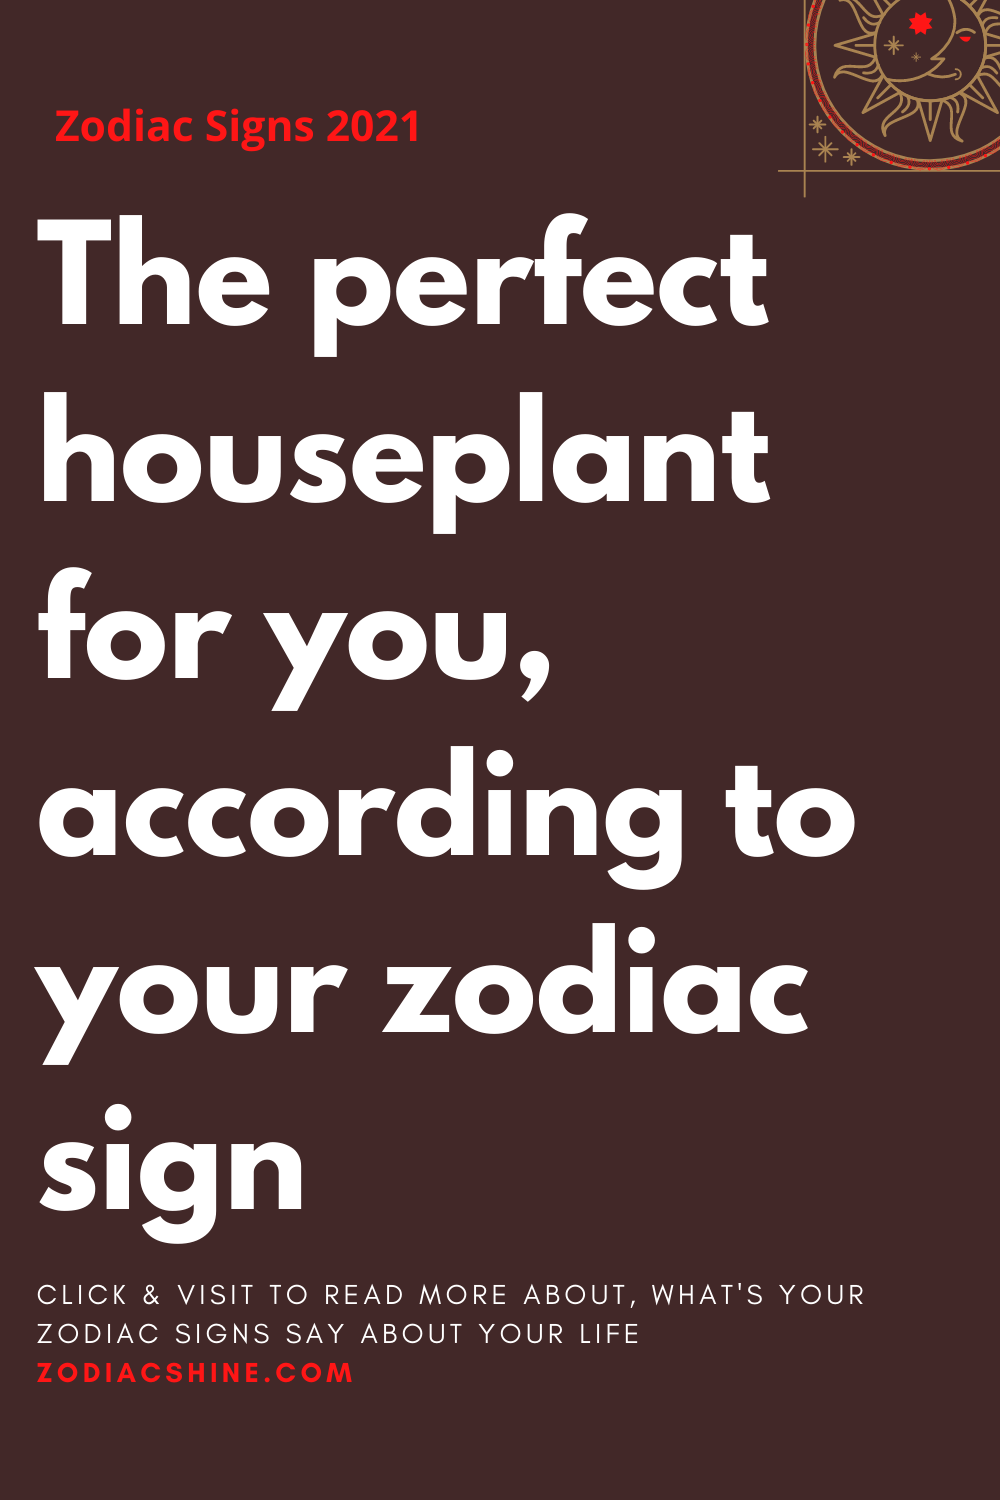 The perfect houseplant for you, according to your zodiac sign